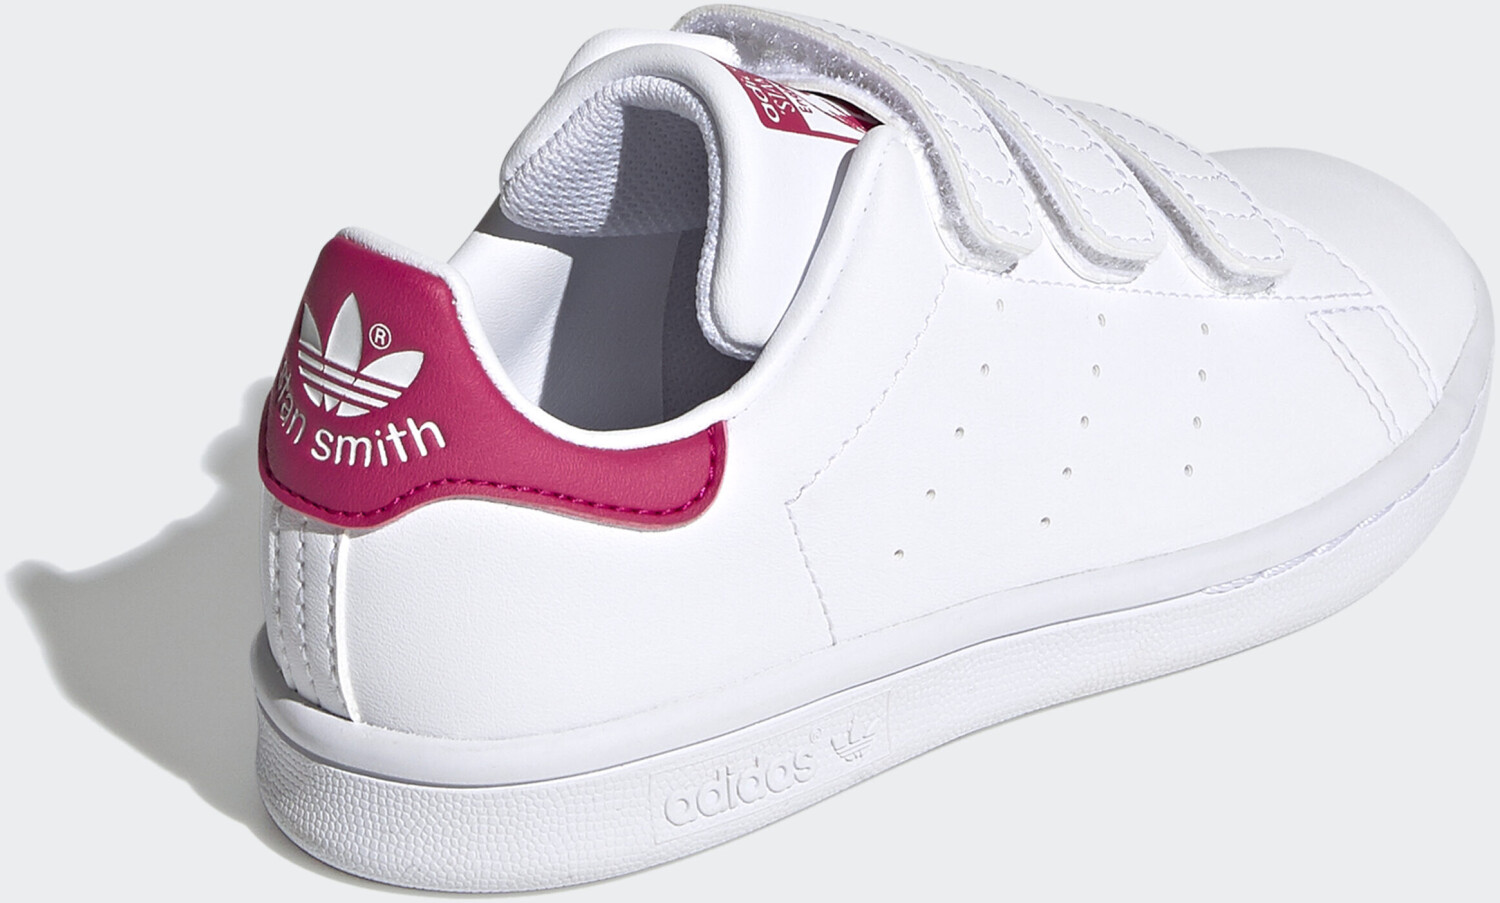 Buy Adidas Stan from Best – Smith White/Bold White/Cloud (Today) on £32.50 Cloud Kinder Pink Deals